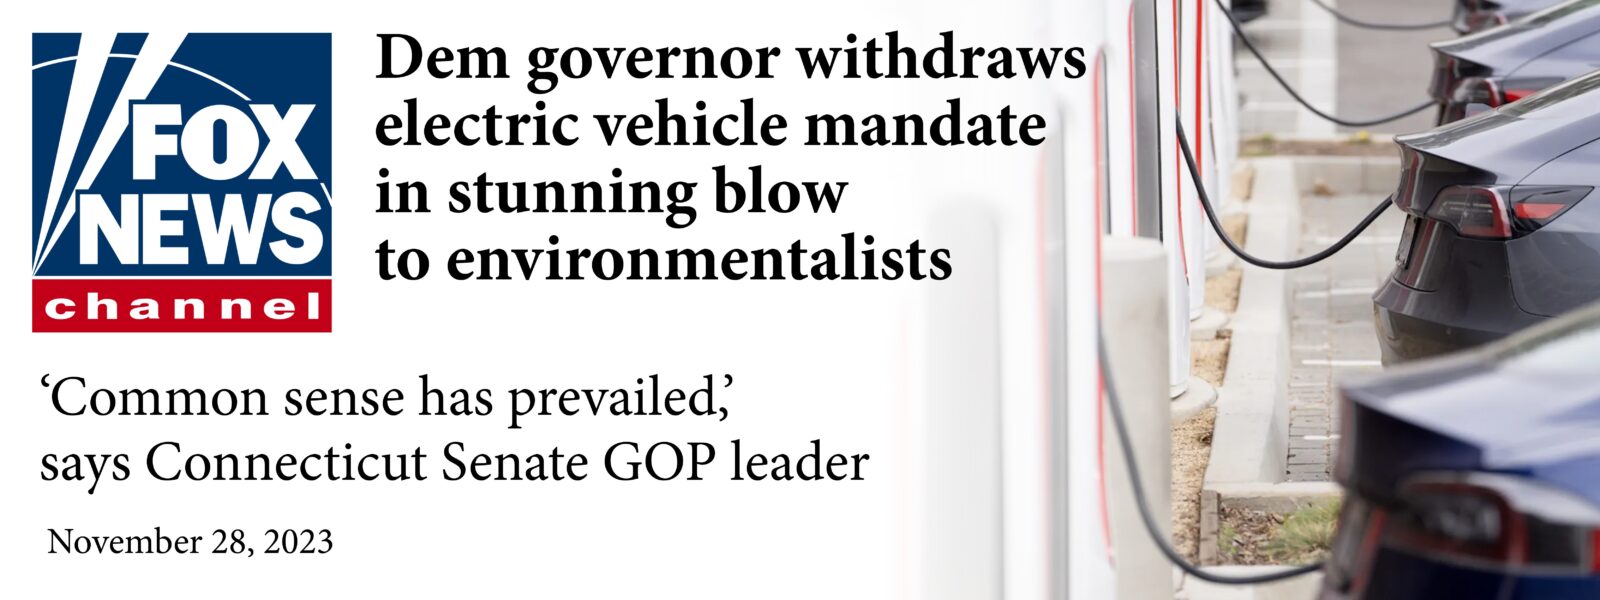 FOX News: Dem governor withdraws electric vehicle mandate in stunning blow to environmentalists